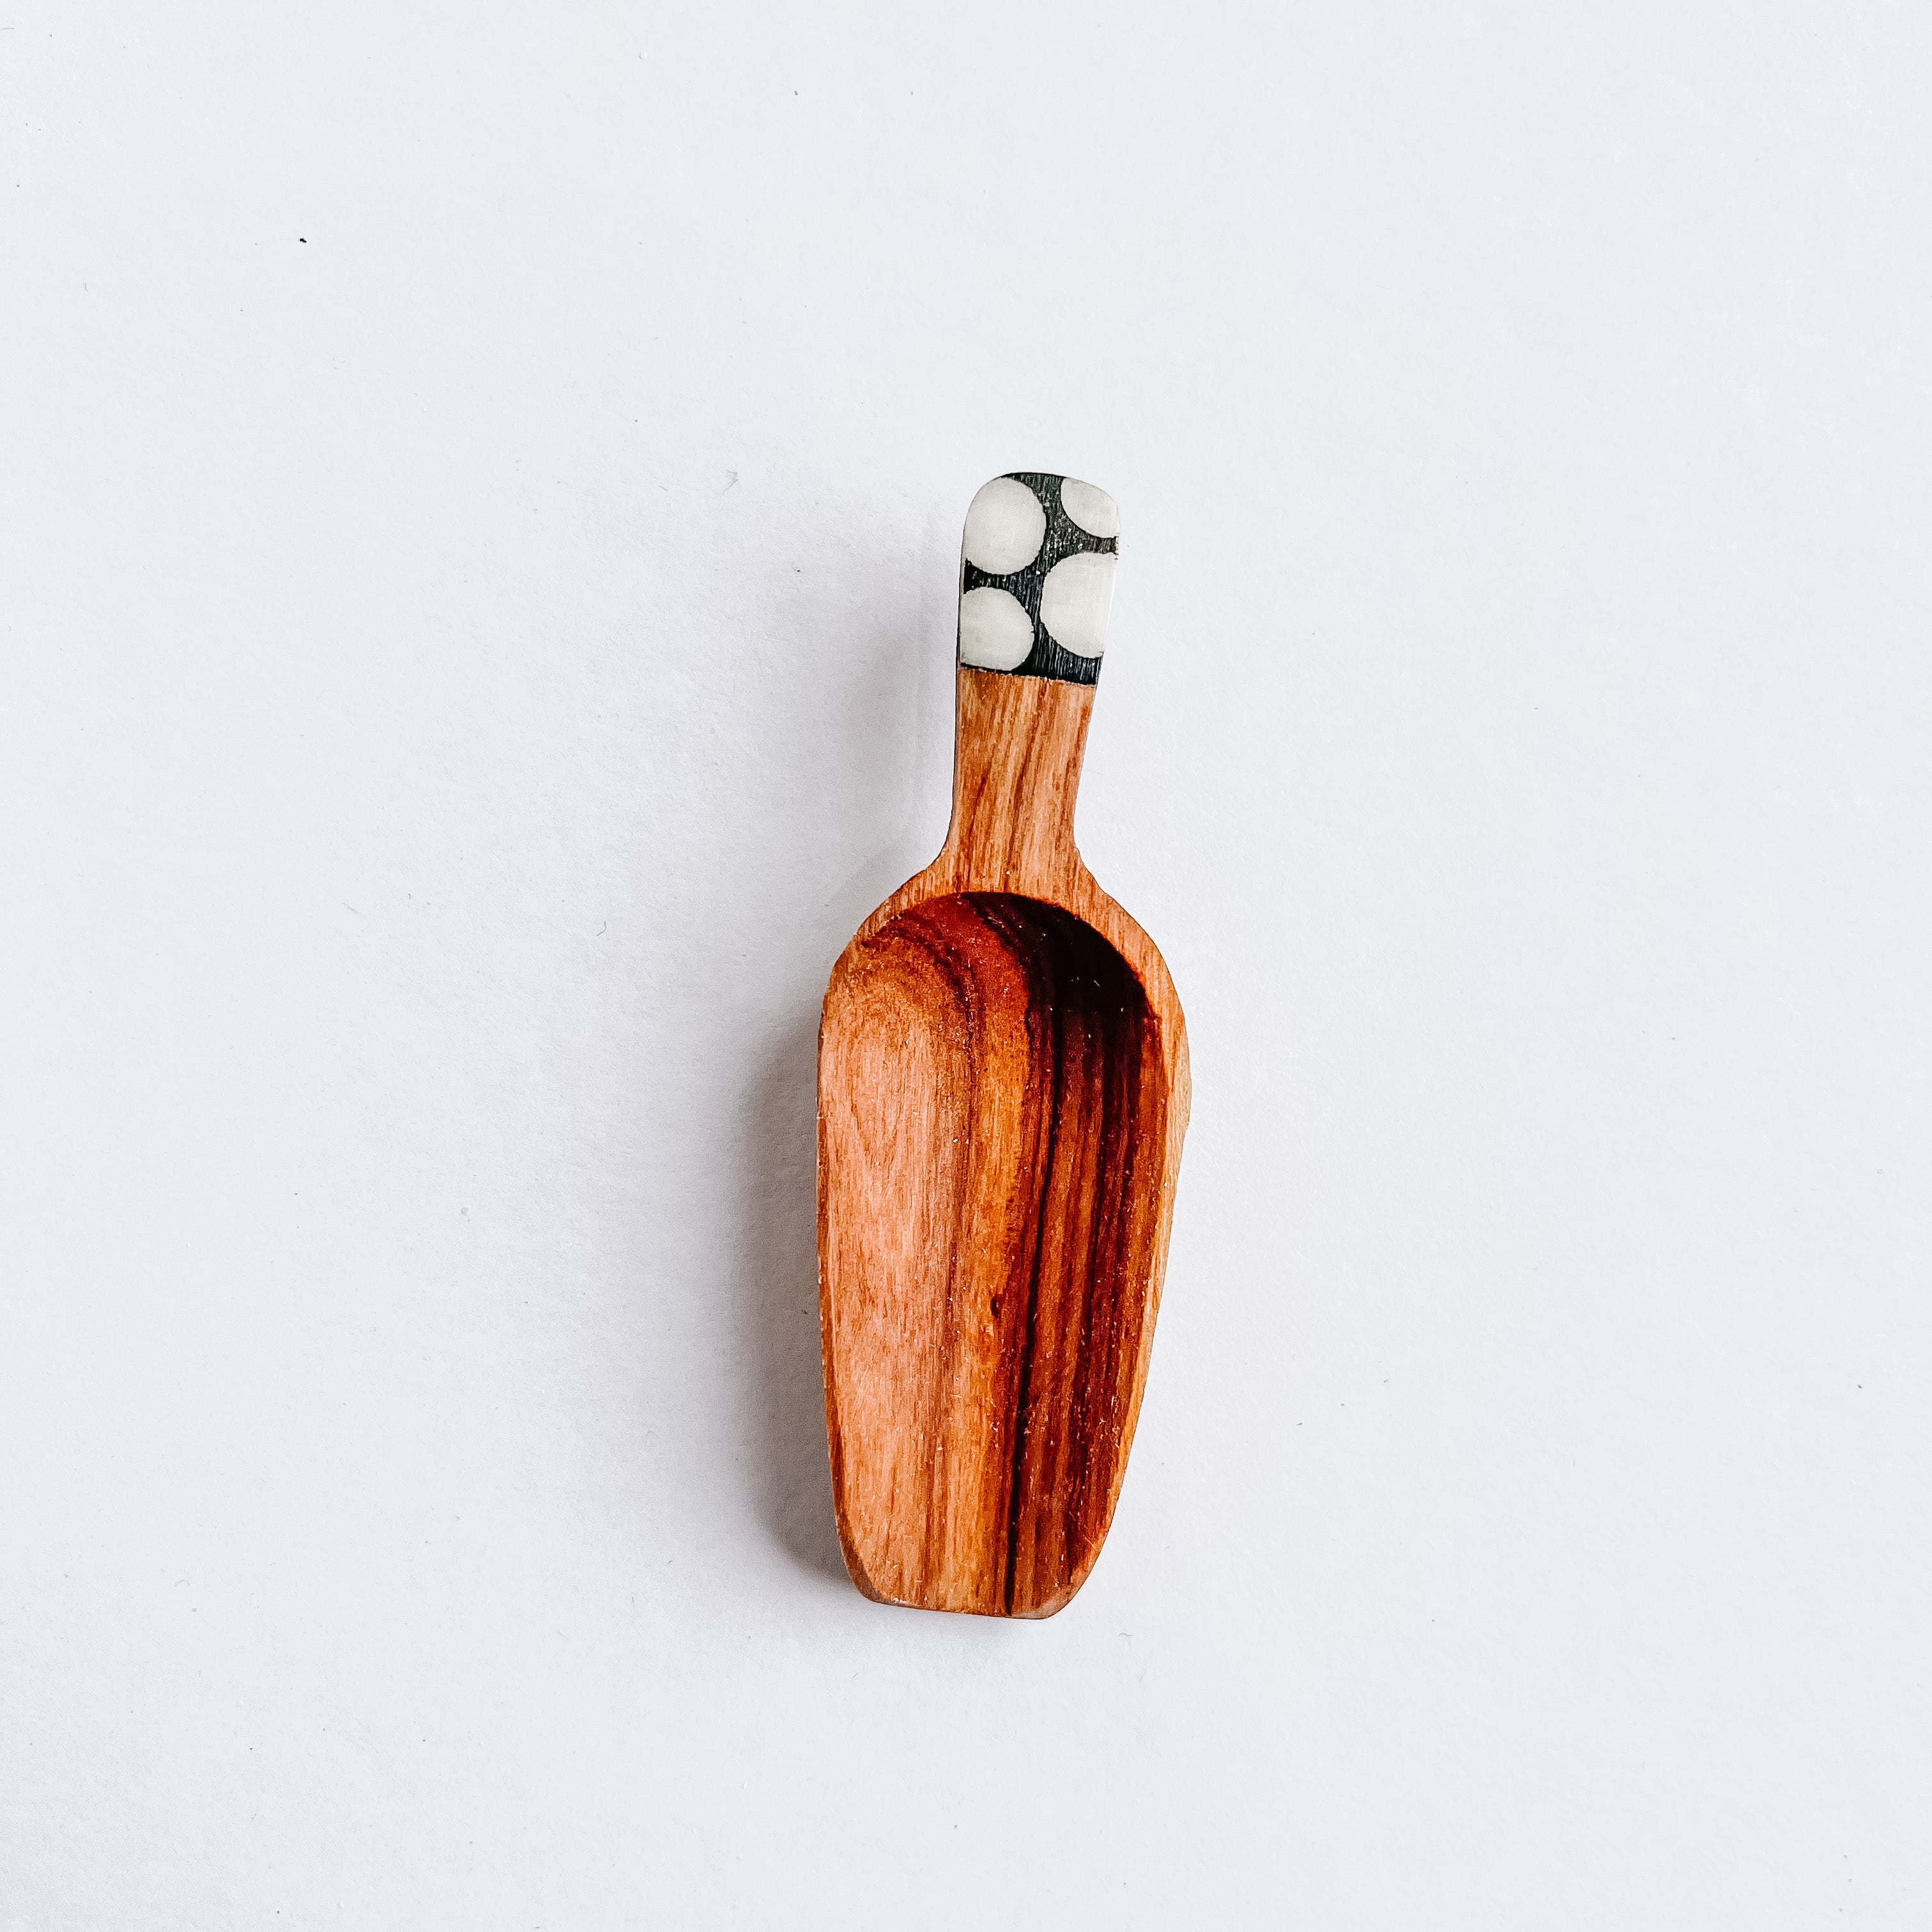 JustOne's four inch wooden scoop with polka dot handle made from ethically sourced bone, handcrafted in Uganda